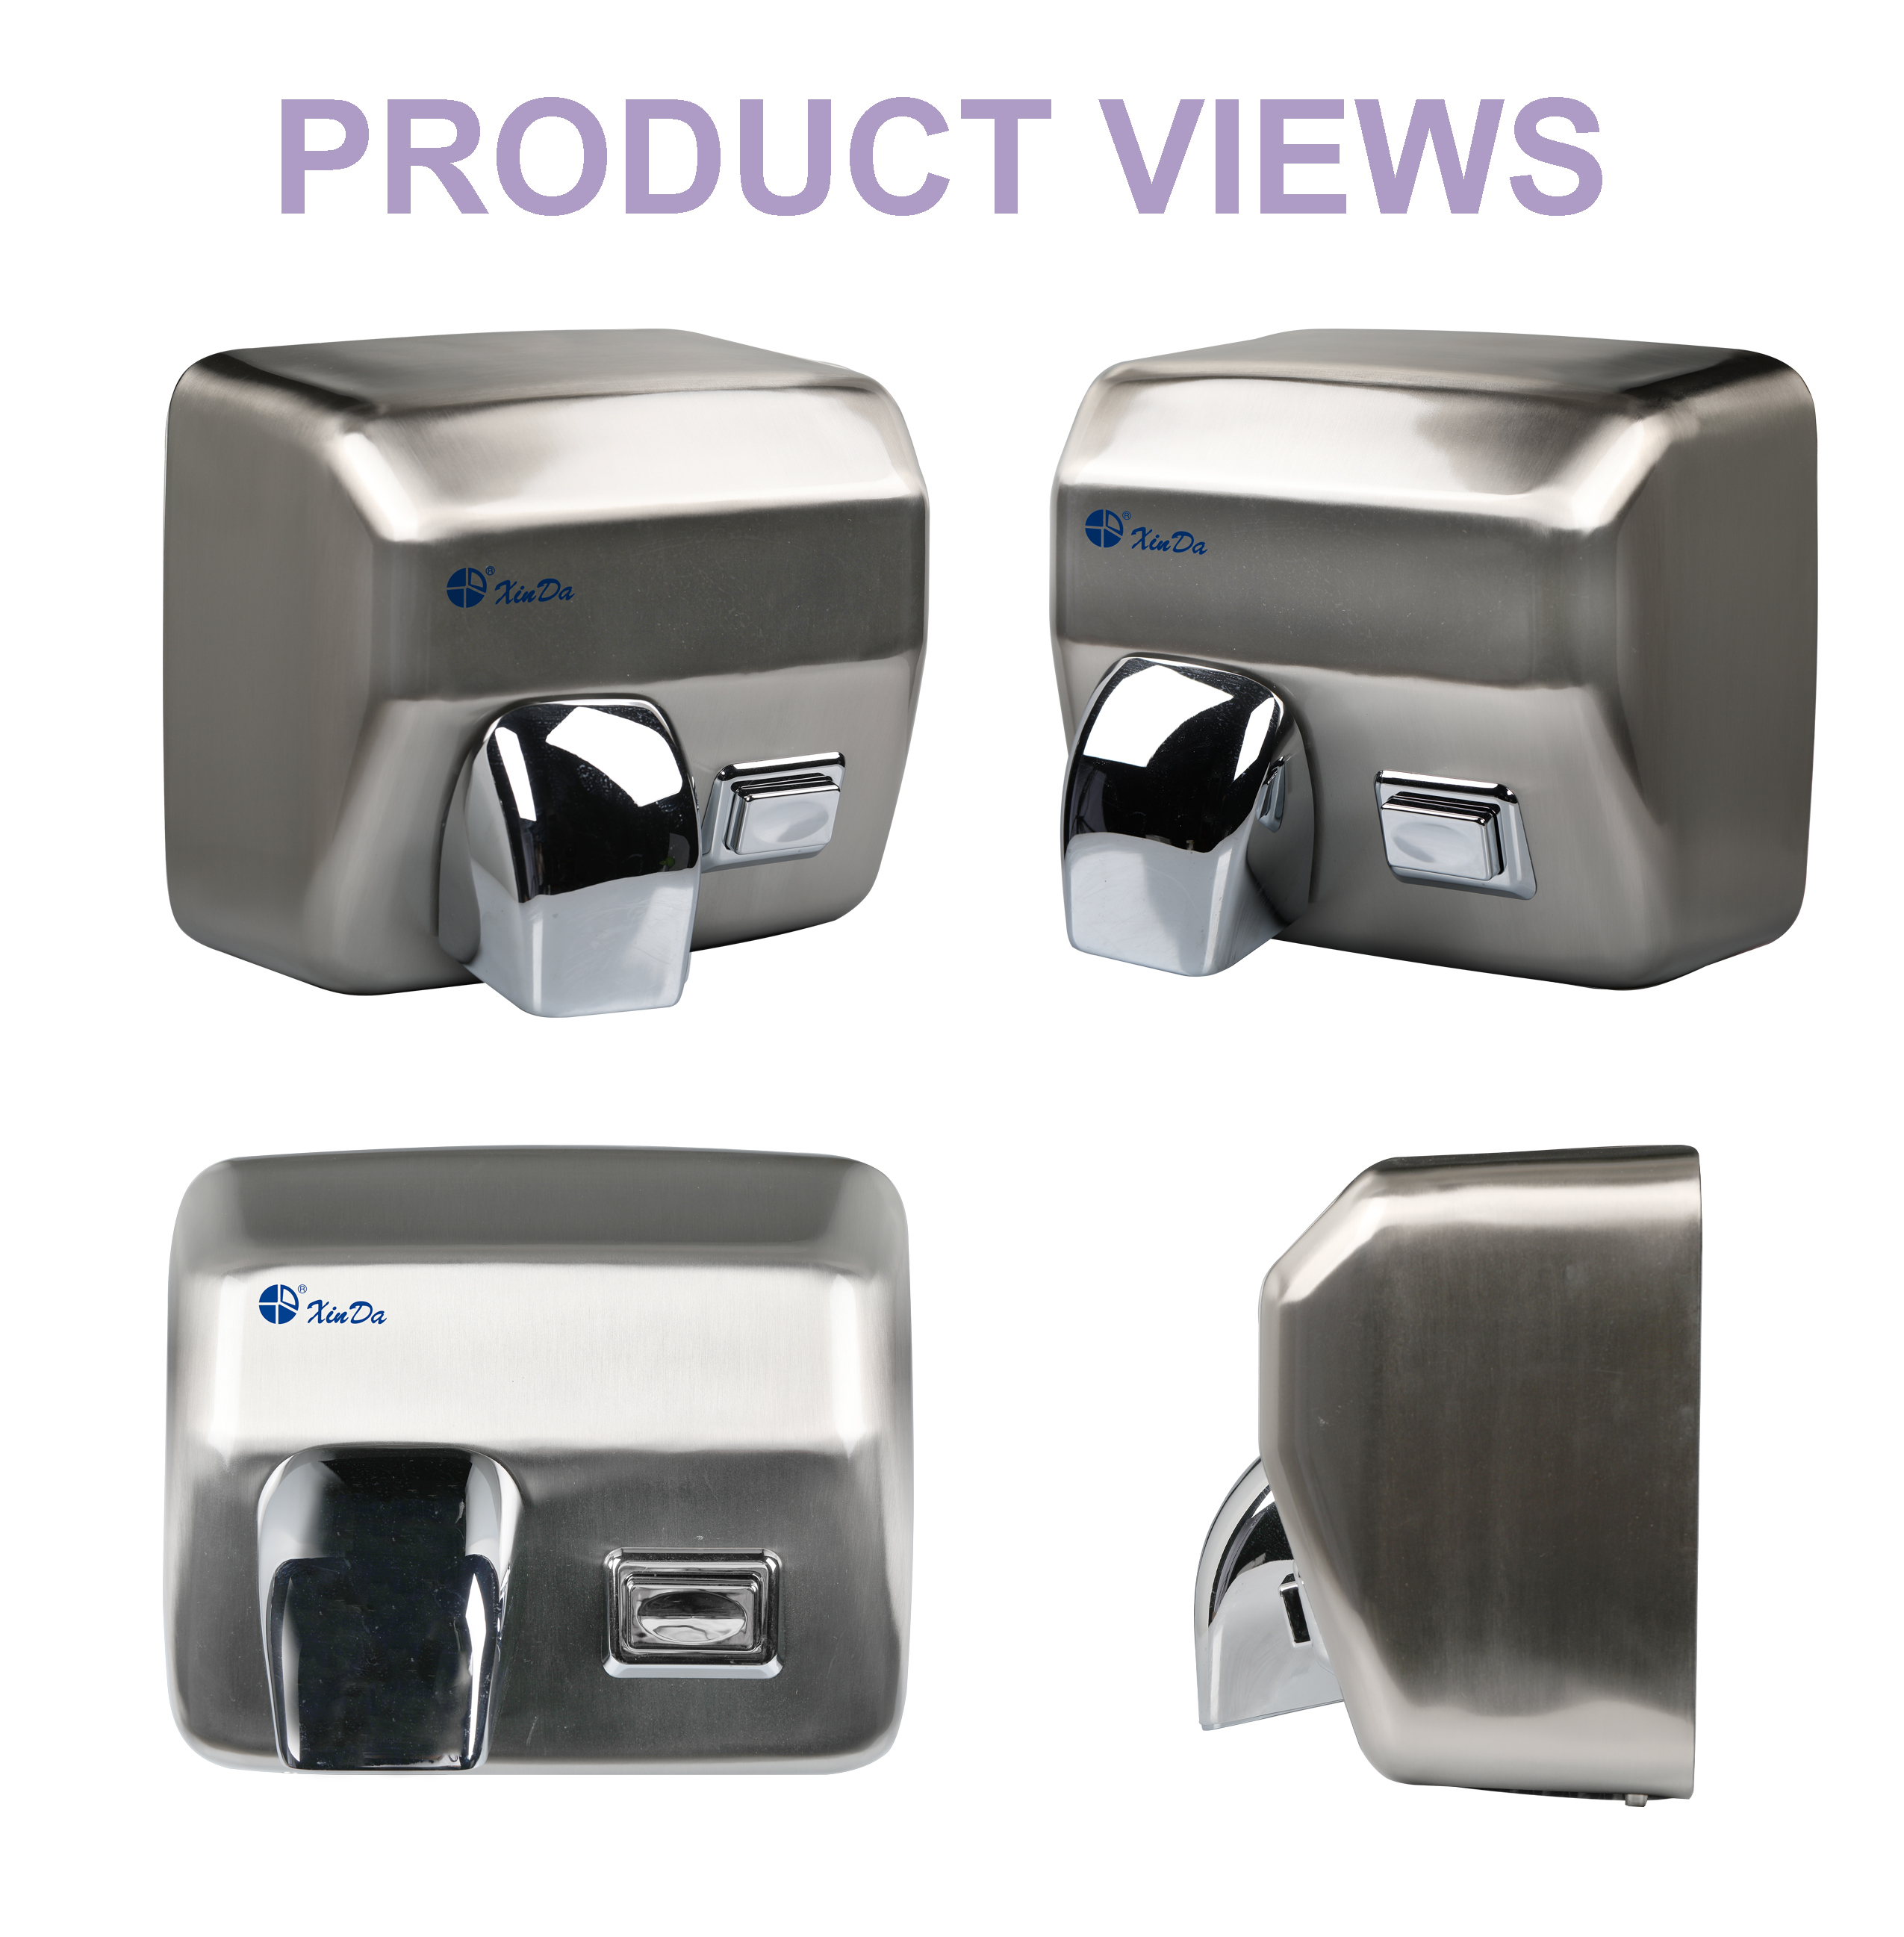 The Development of Hand Dryers: From Fundamental to Automatic and Wall-Mounted Performance